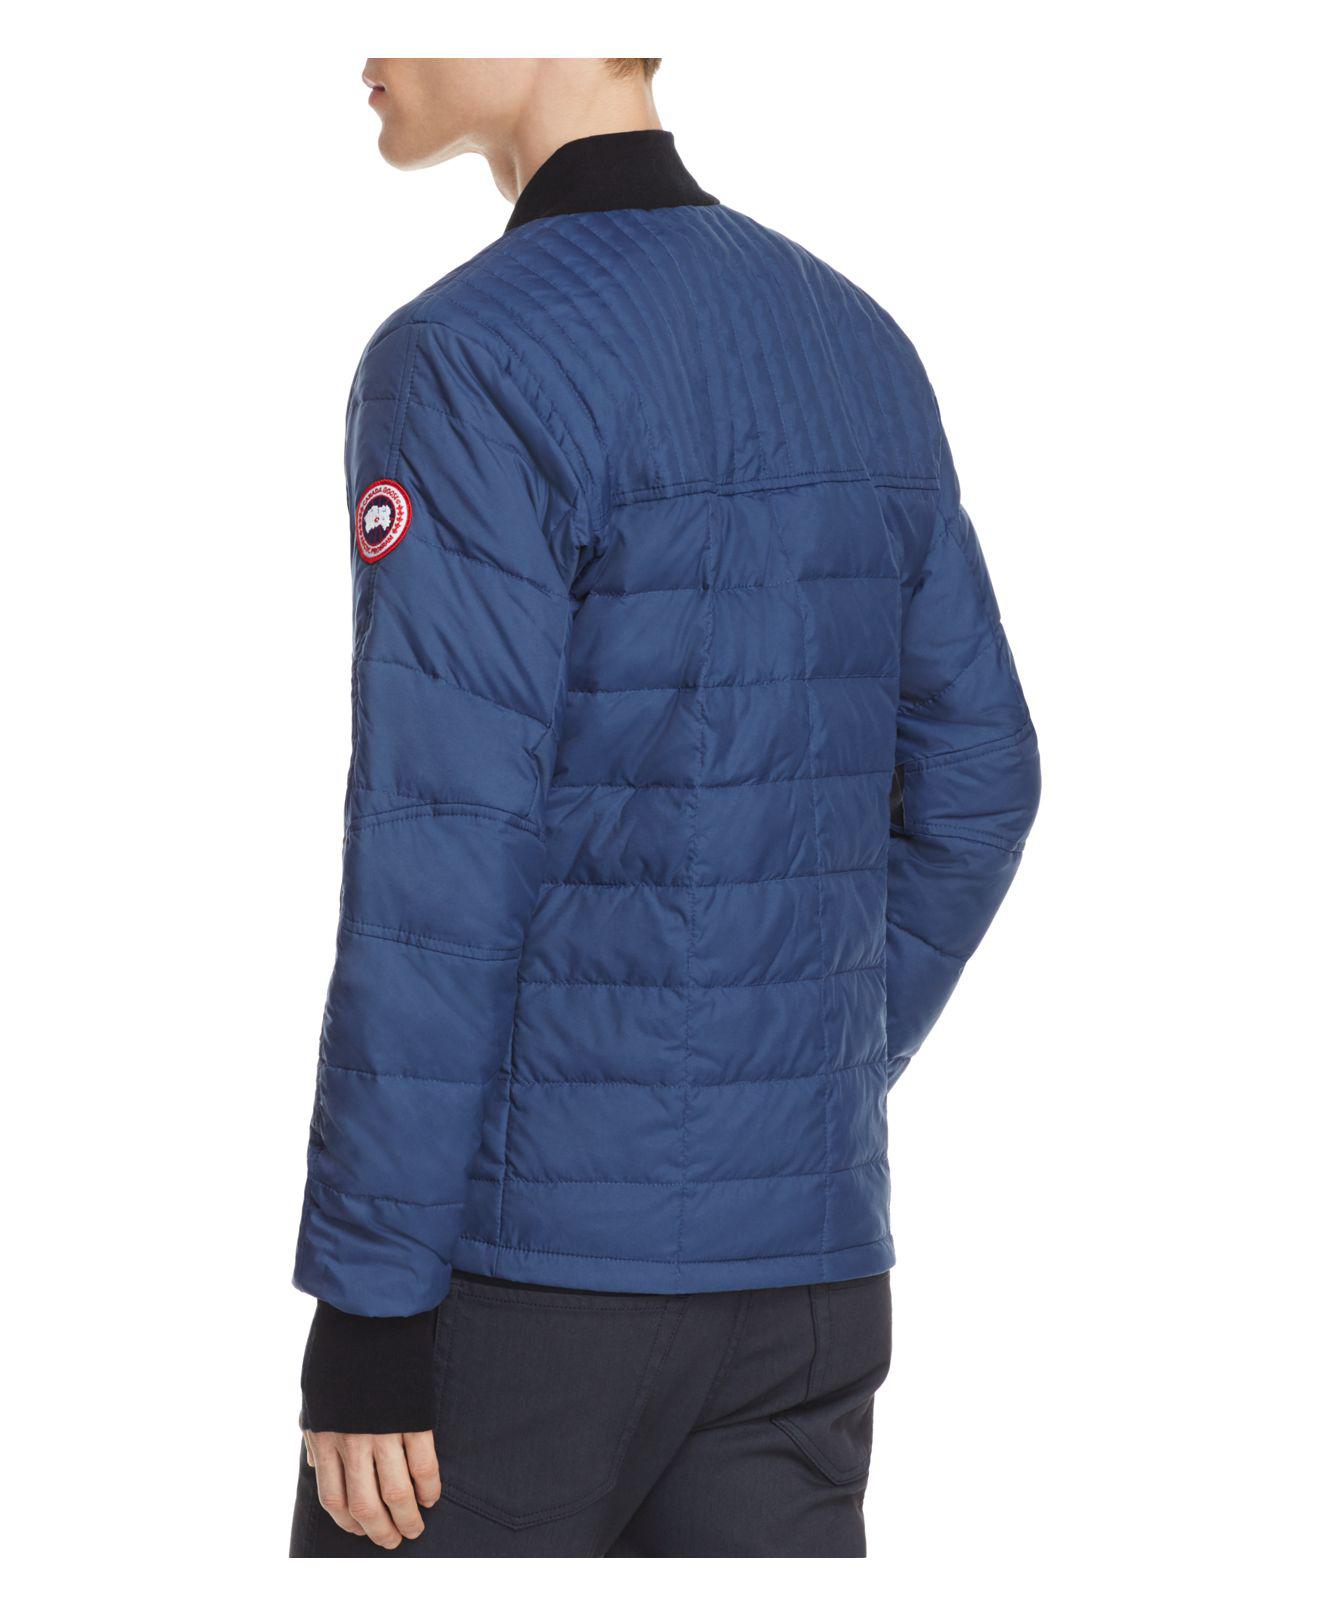 Canada Goose Goose Dunham Down Jacket in Marine Blue (Blue) for Men - Lyst